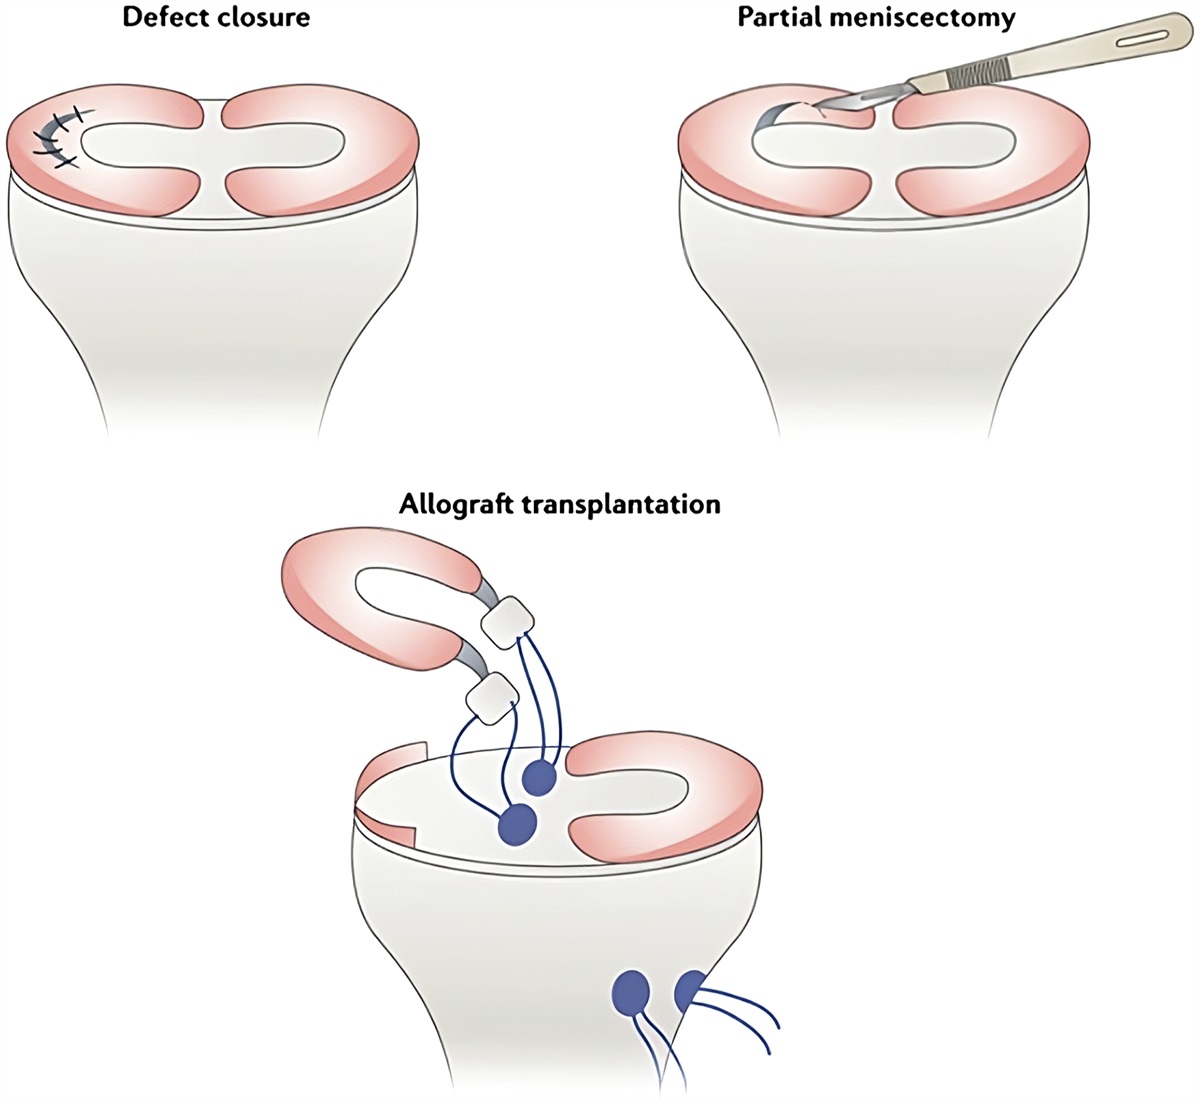 A Transplant or a Patch? A Review of the Biologic Integration of Meniscus Allograft Transplantation